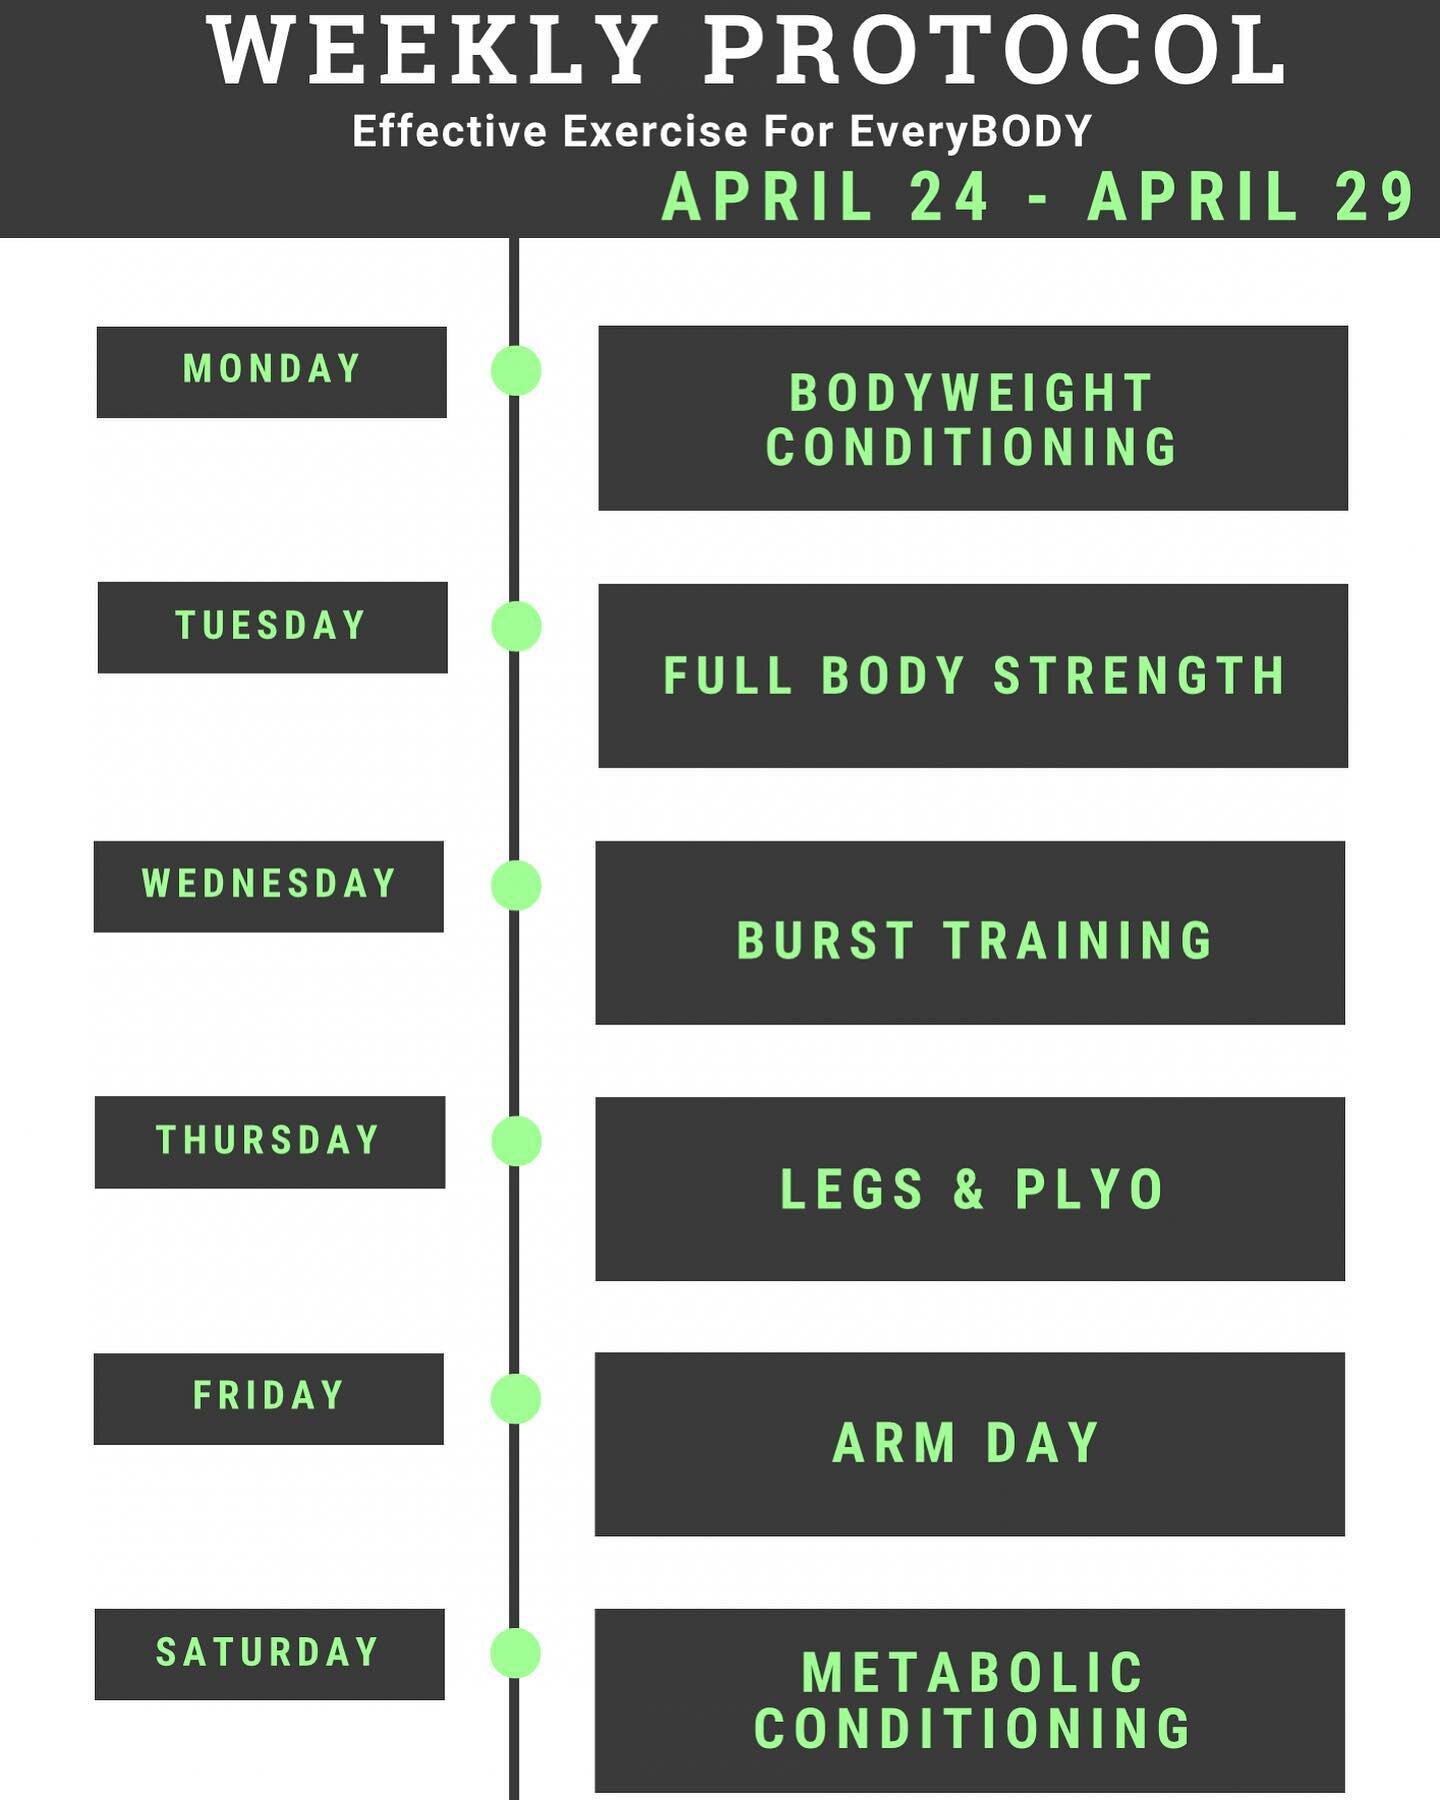 It&rsquo;s the last week of our April Challenge! Let&rsquo;s get it in 💪🔥💪🔥
.
Click the link below ⬇️ and get signed up for 7 days FREE!
.
https://www.e3fitnessnc.com/free-trial
.
🏃🏾&zwj;♀️Use our 📲 to Sign Up
.
🏃&zwj;♀️Questions? Ask us ⬇️
.